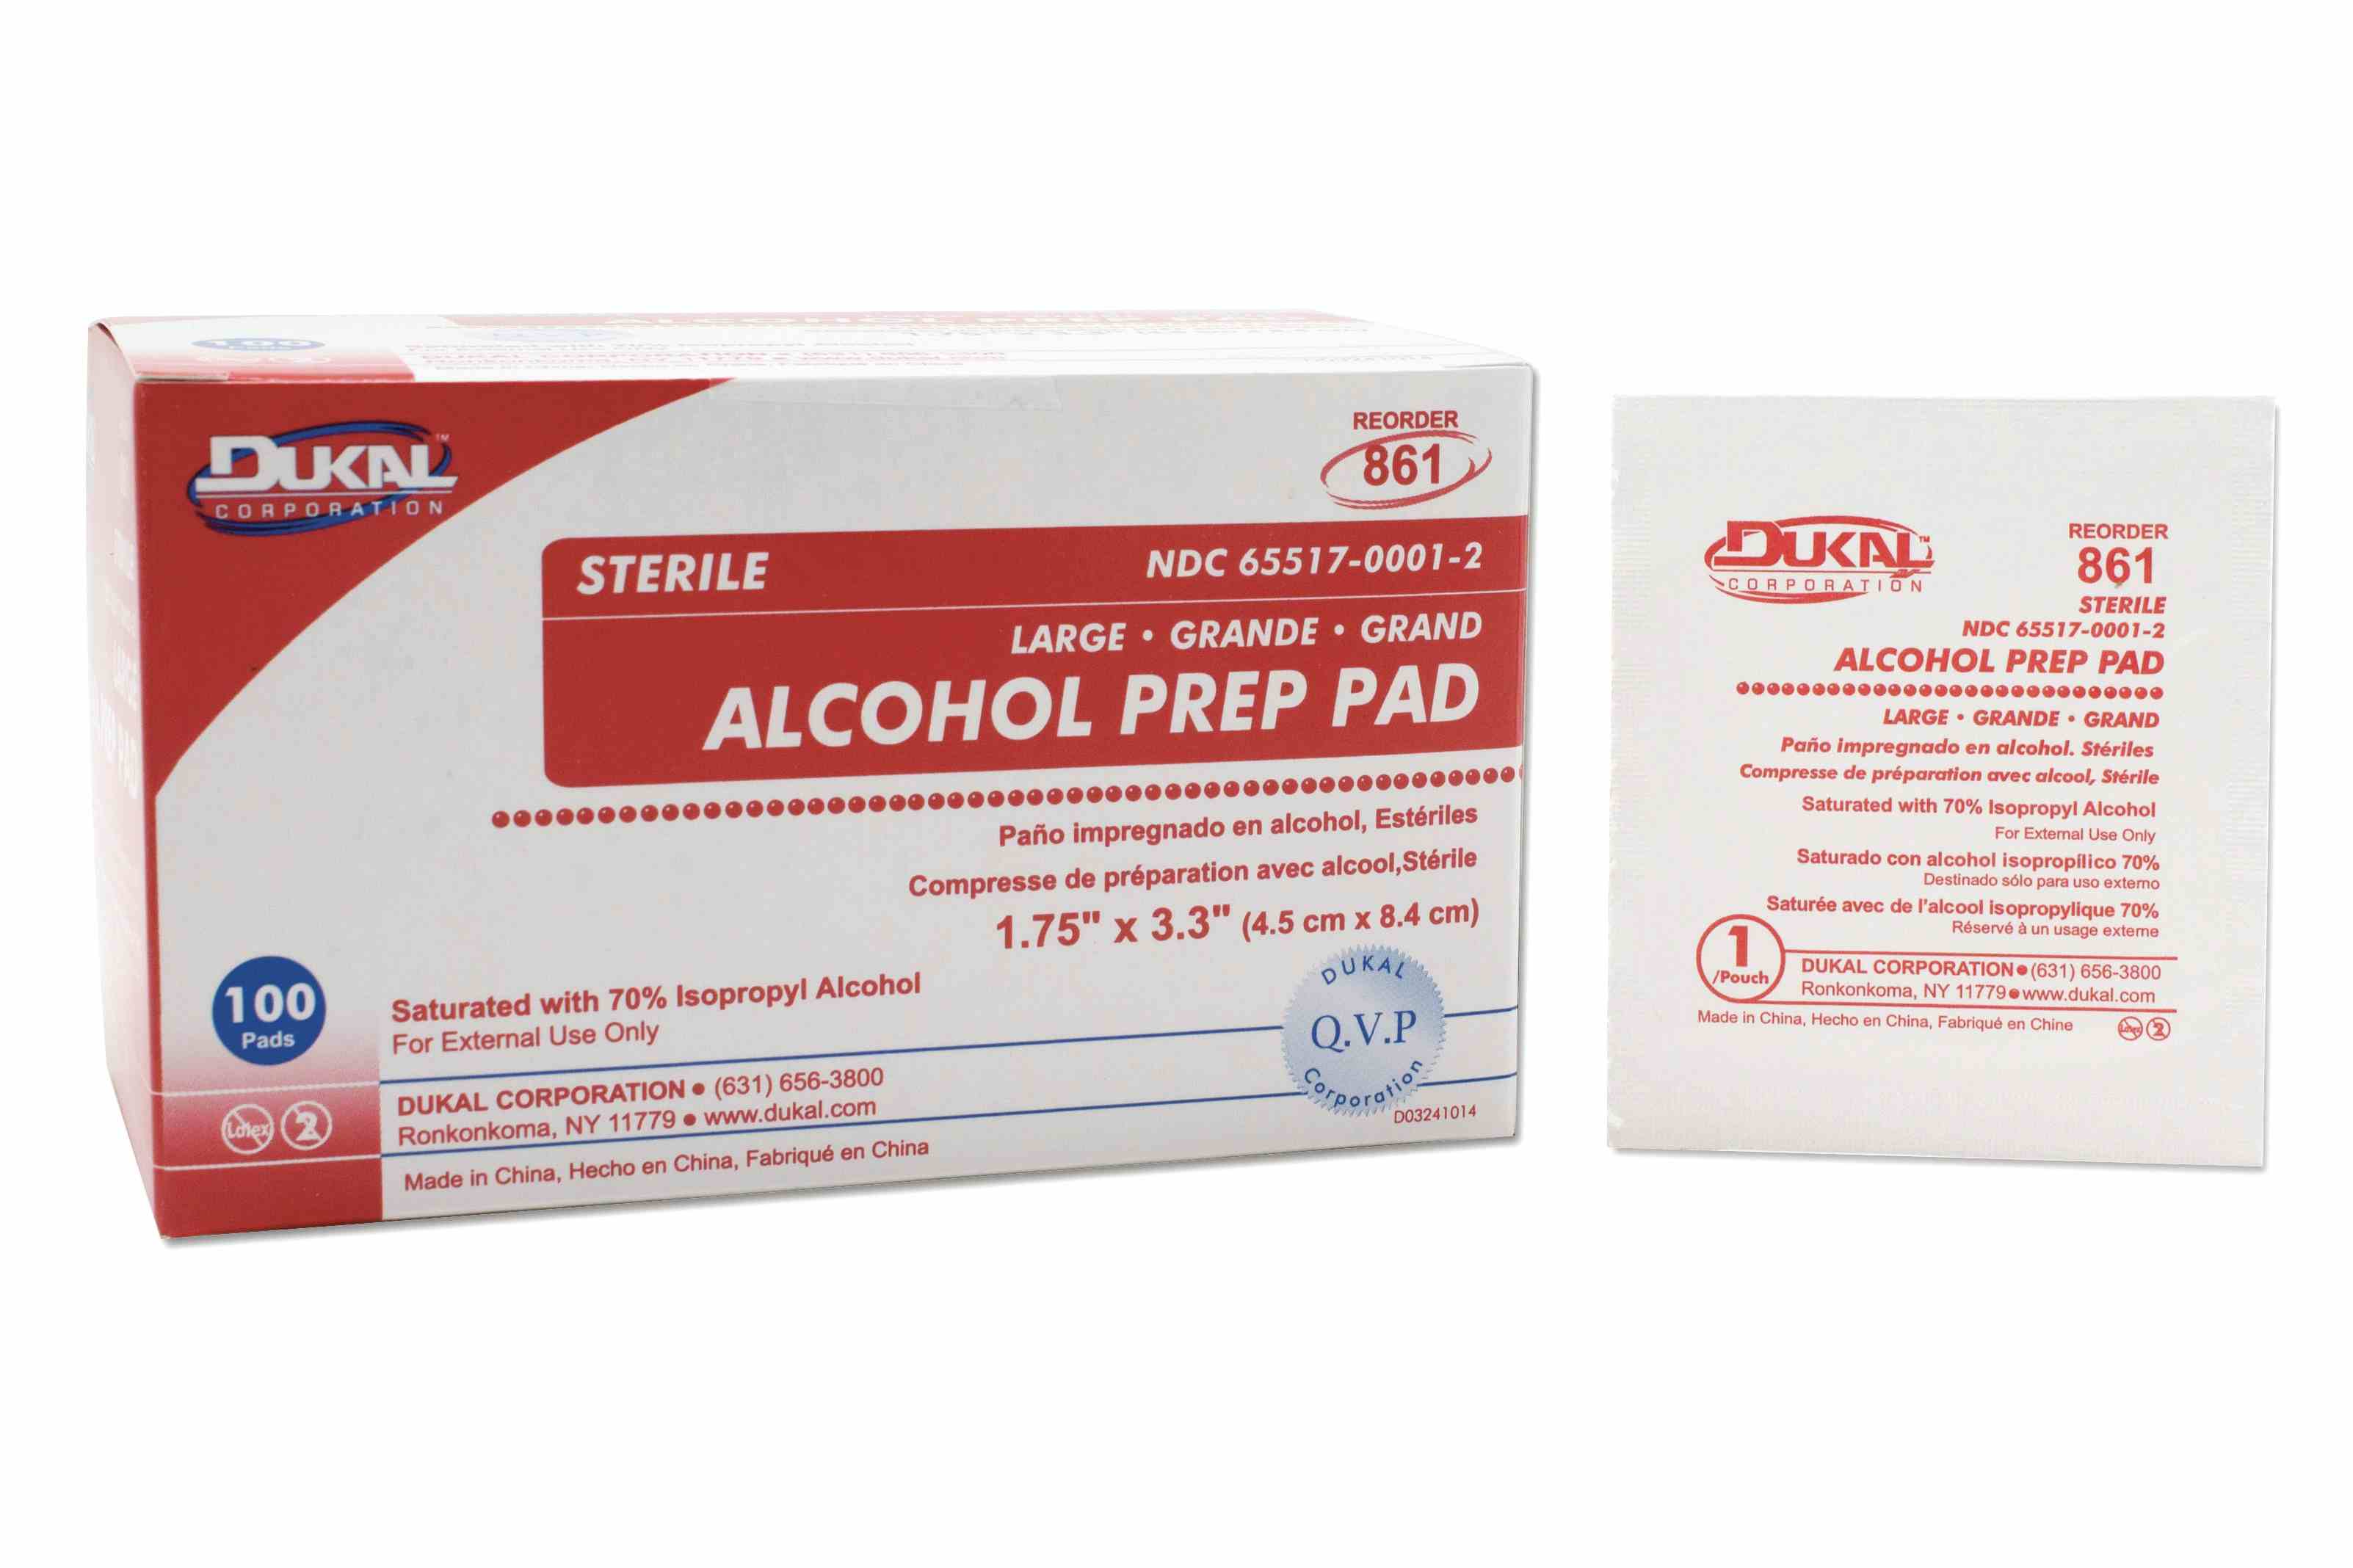 Dukal Large Alcohol Prep Pad, Individual Packet, 861, Case of 1000